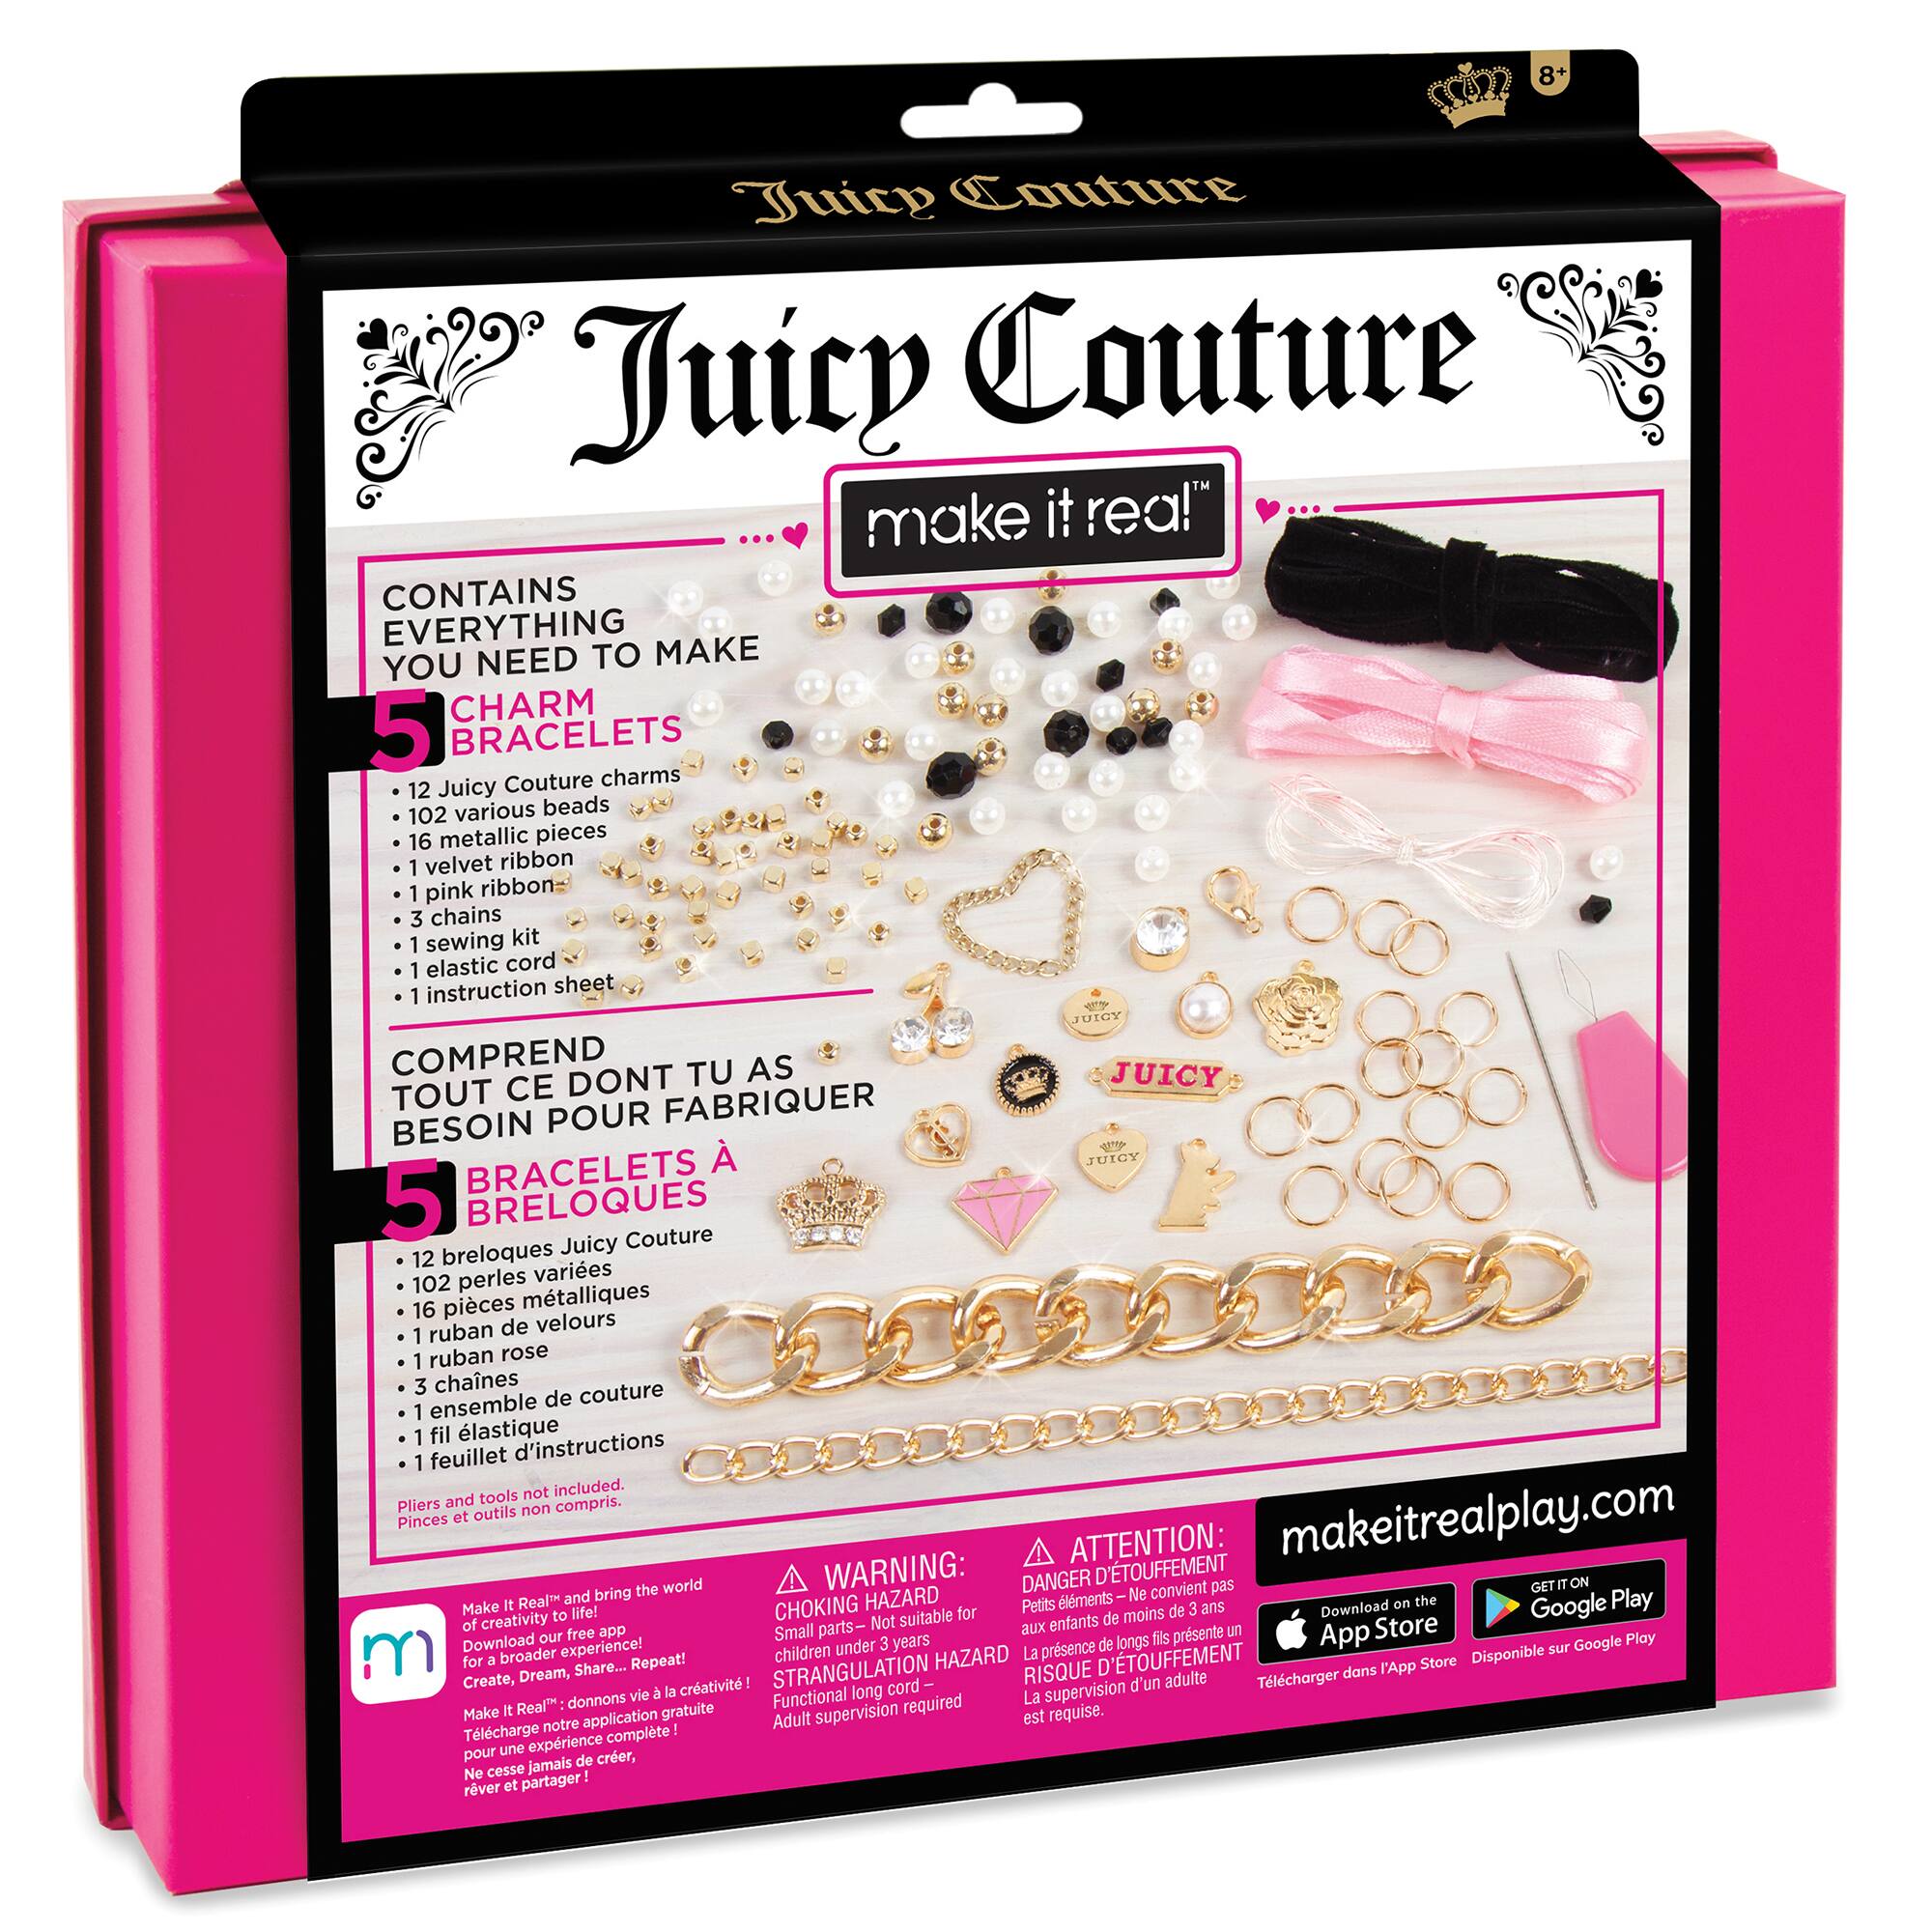 Make It Real Juicy Couture Chains &#x26; Charms Bracelet Kit